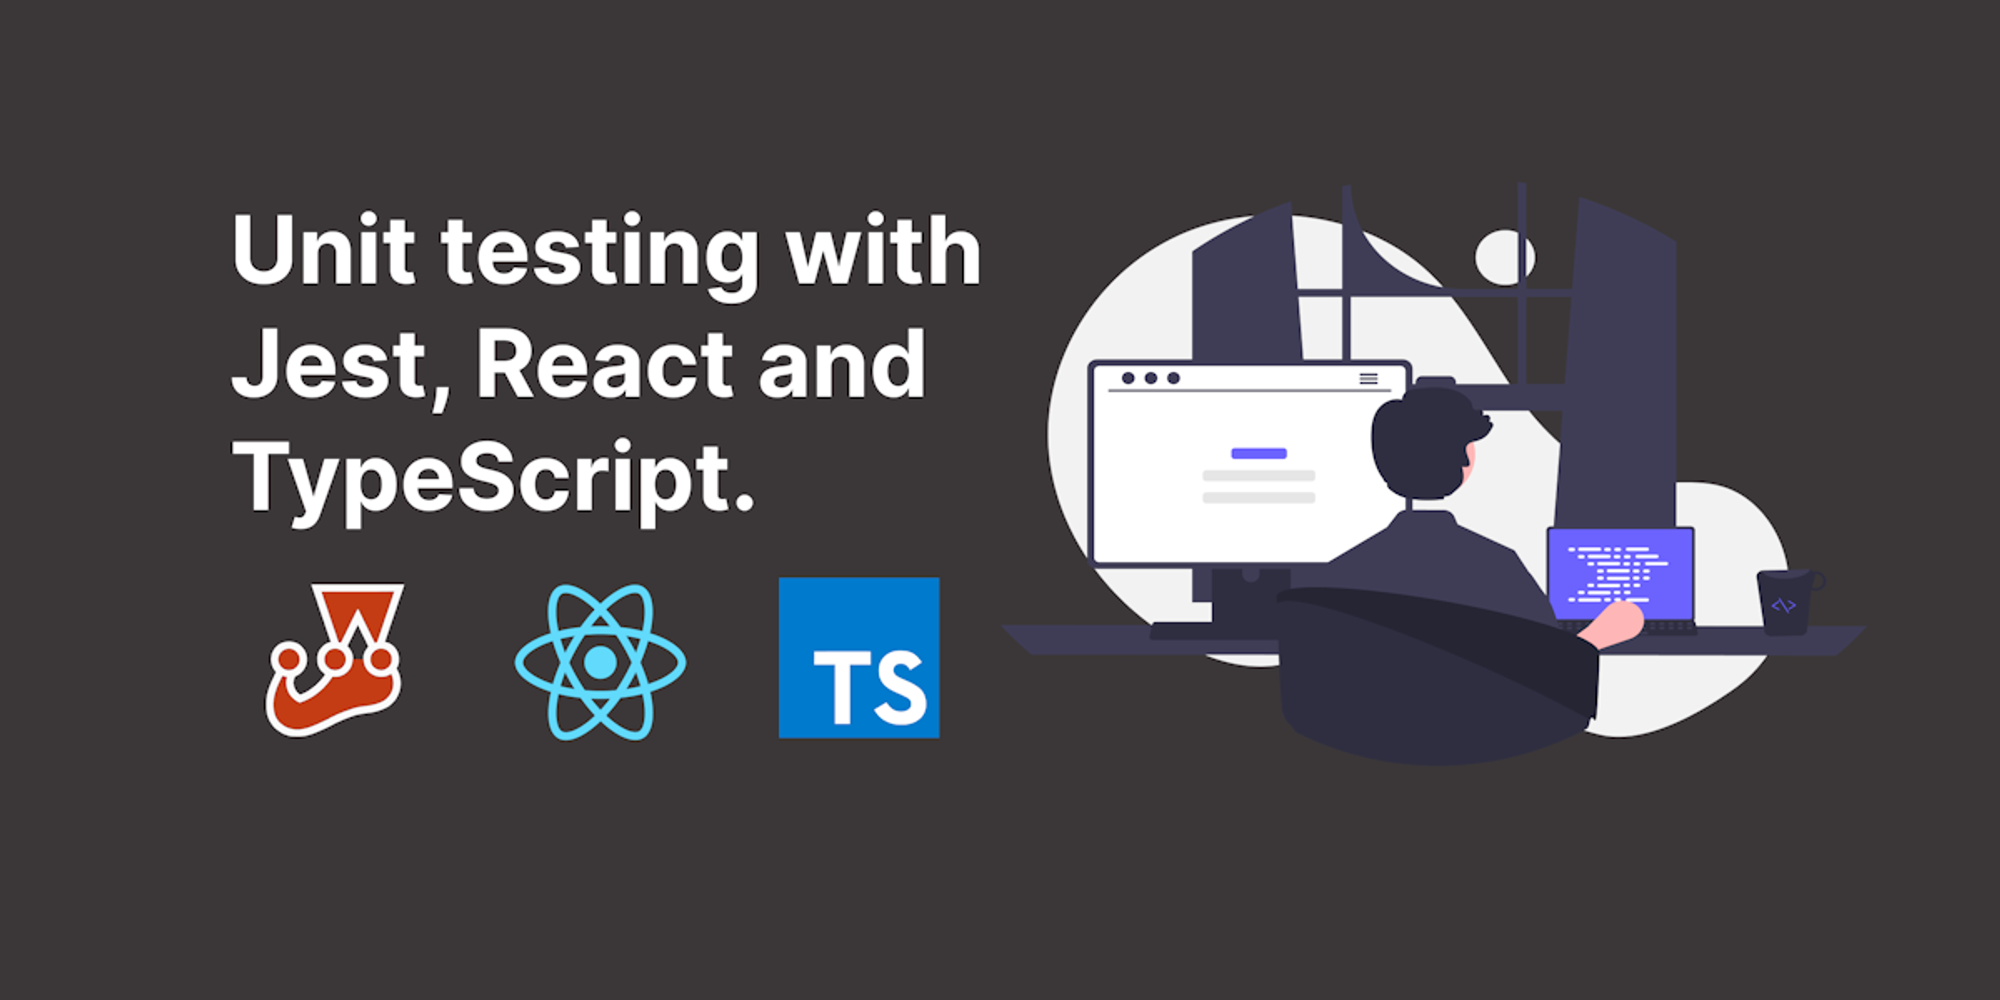 Unit testing with Jest, React, and TypeScript